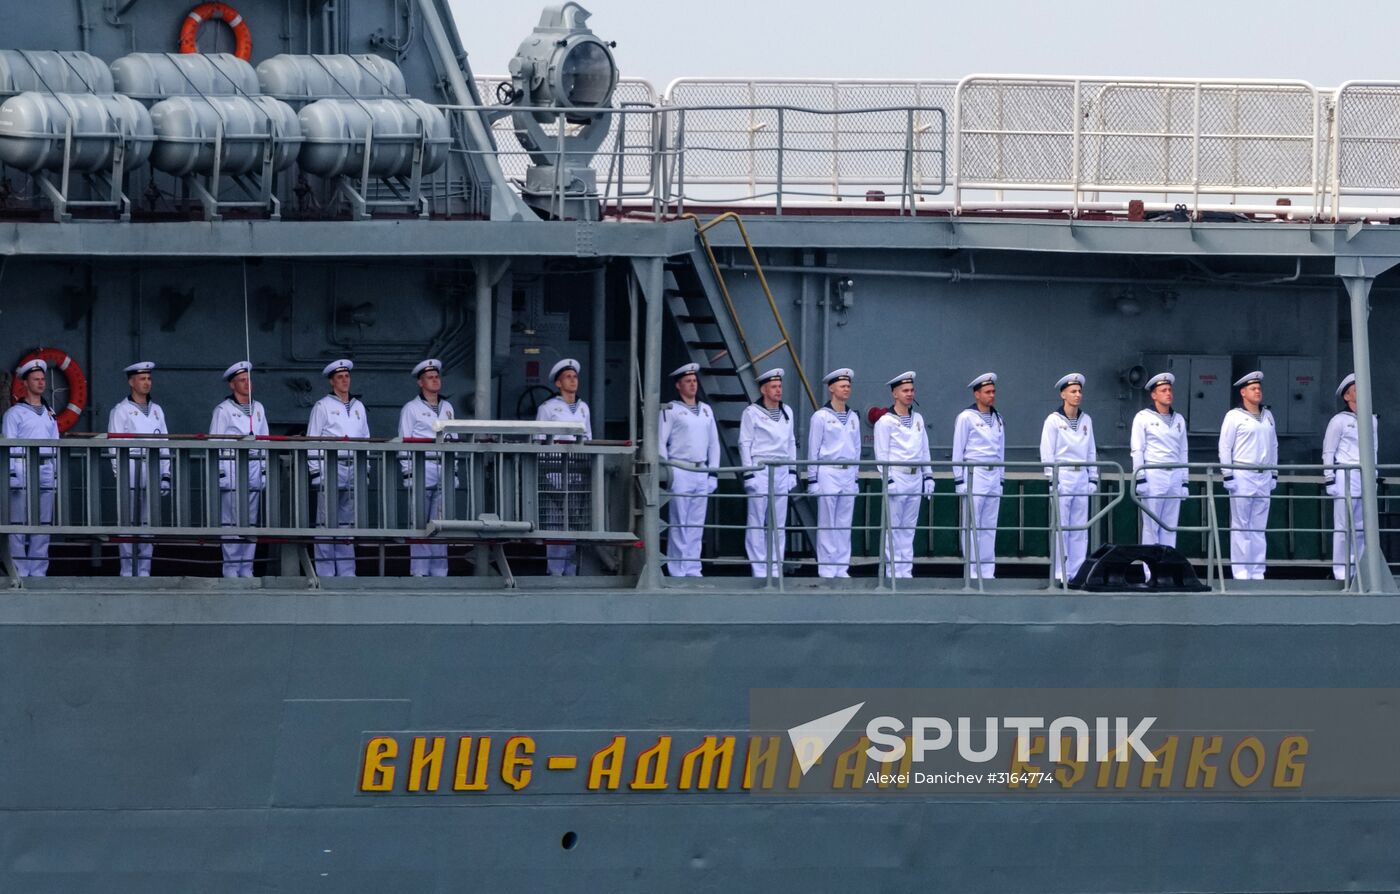 Final rehearsal of naval parade to celebrate Russian Navy Day in Kronstadt